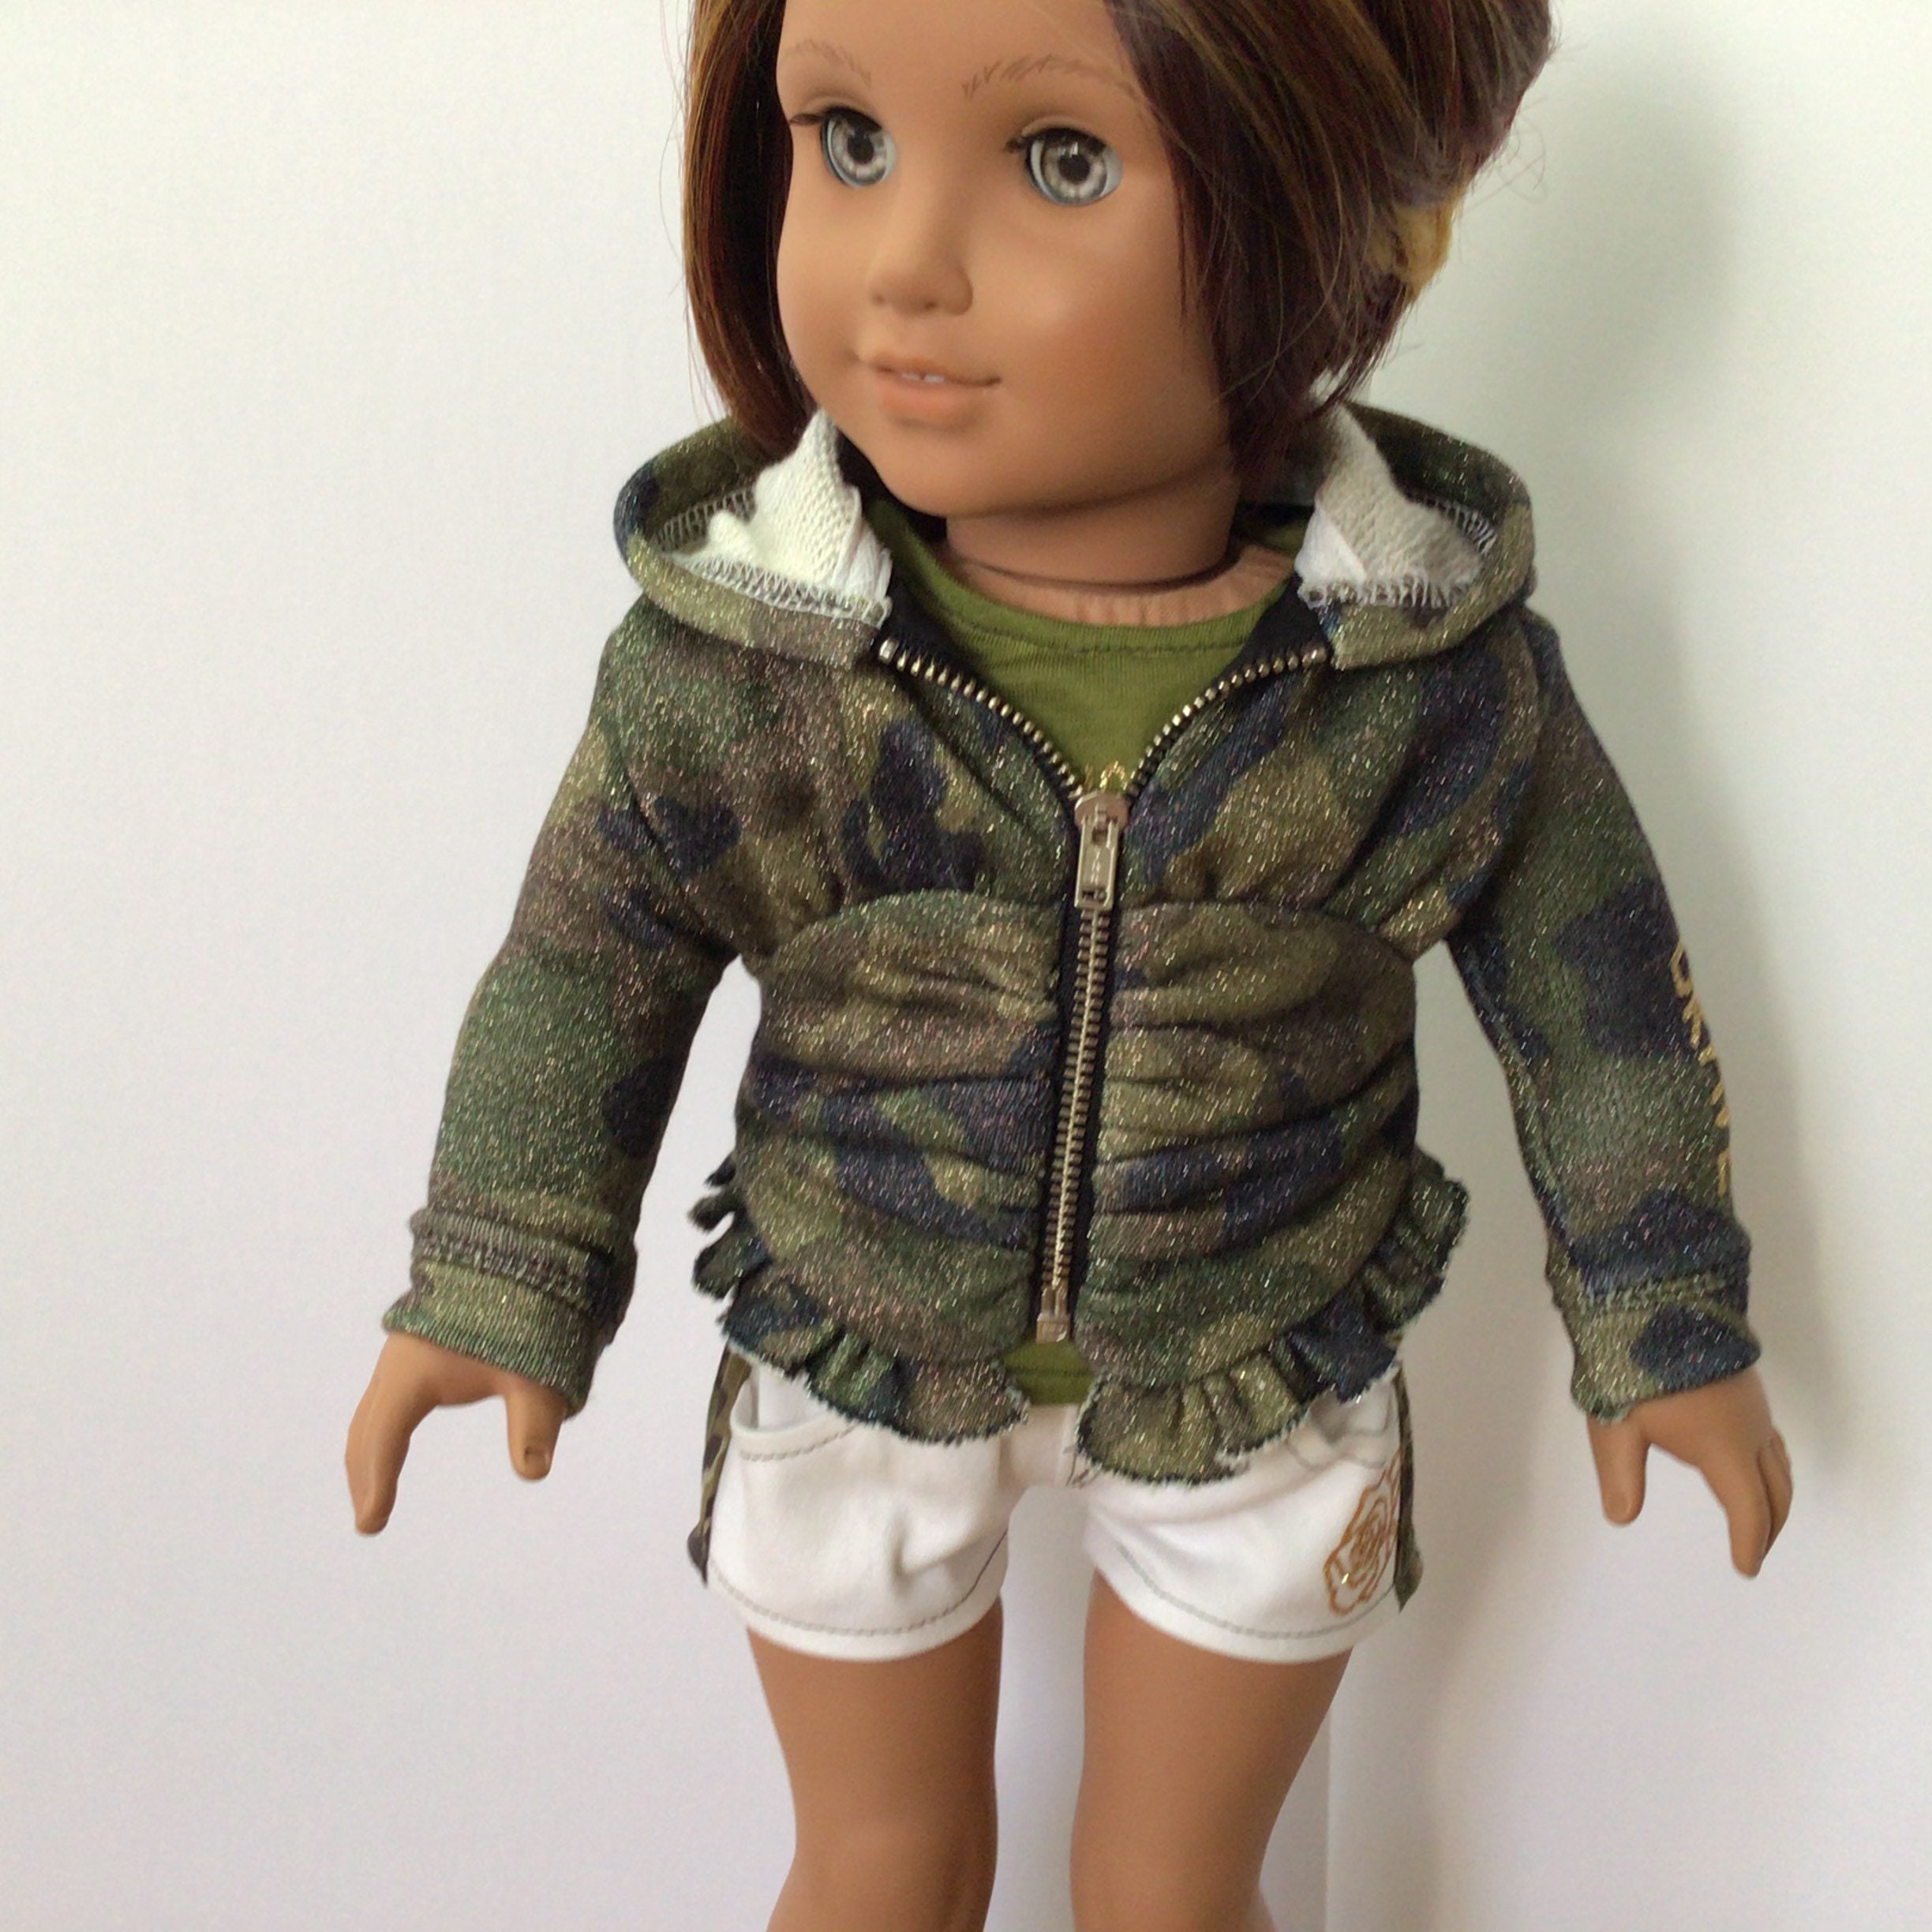 18 Inch Doll AG Doll Camouflage Hooded/Hoodie Jacket Olive | Etsy